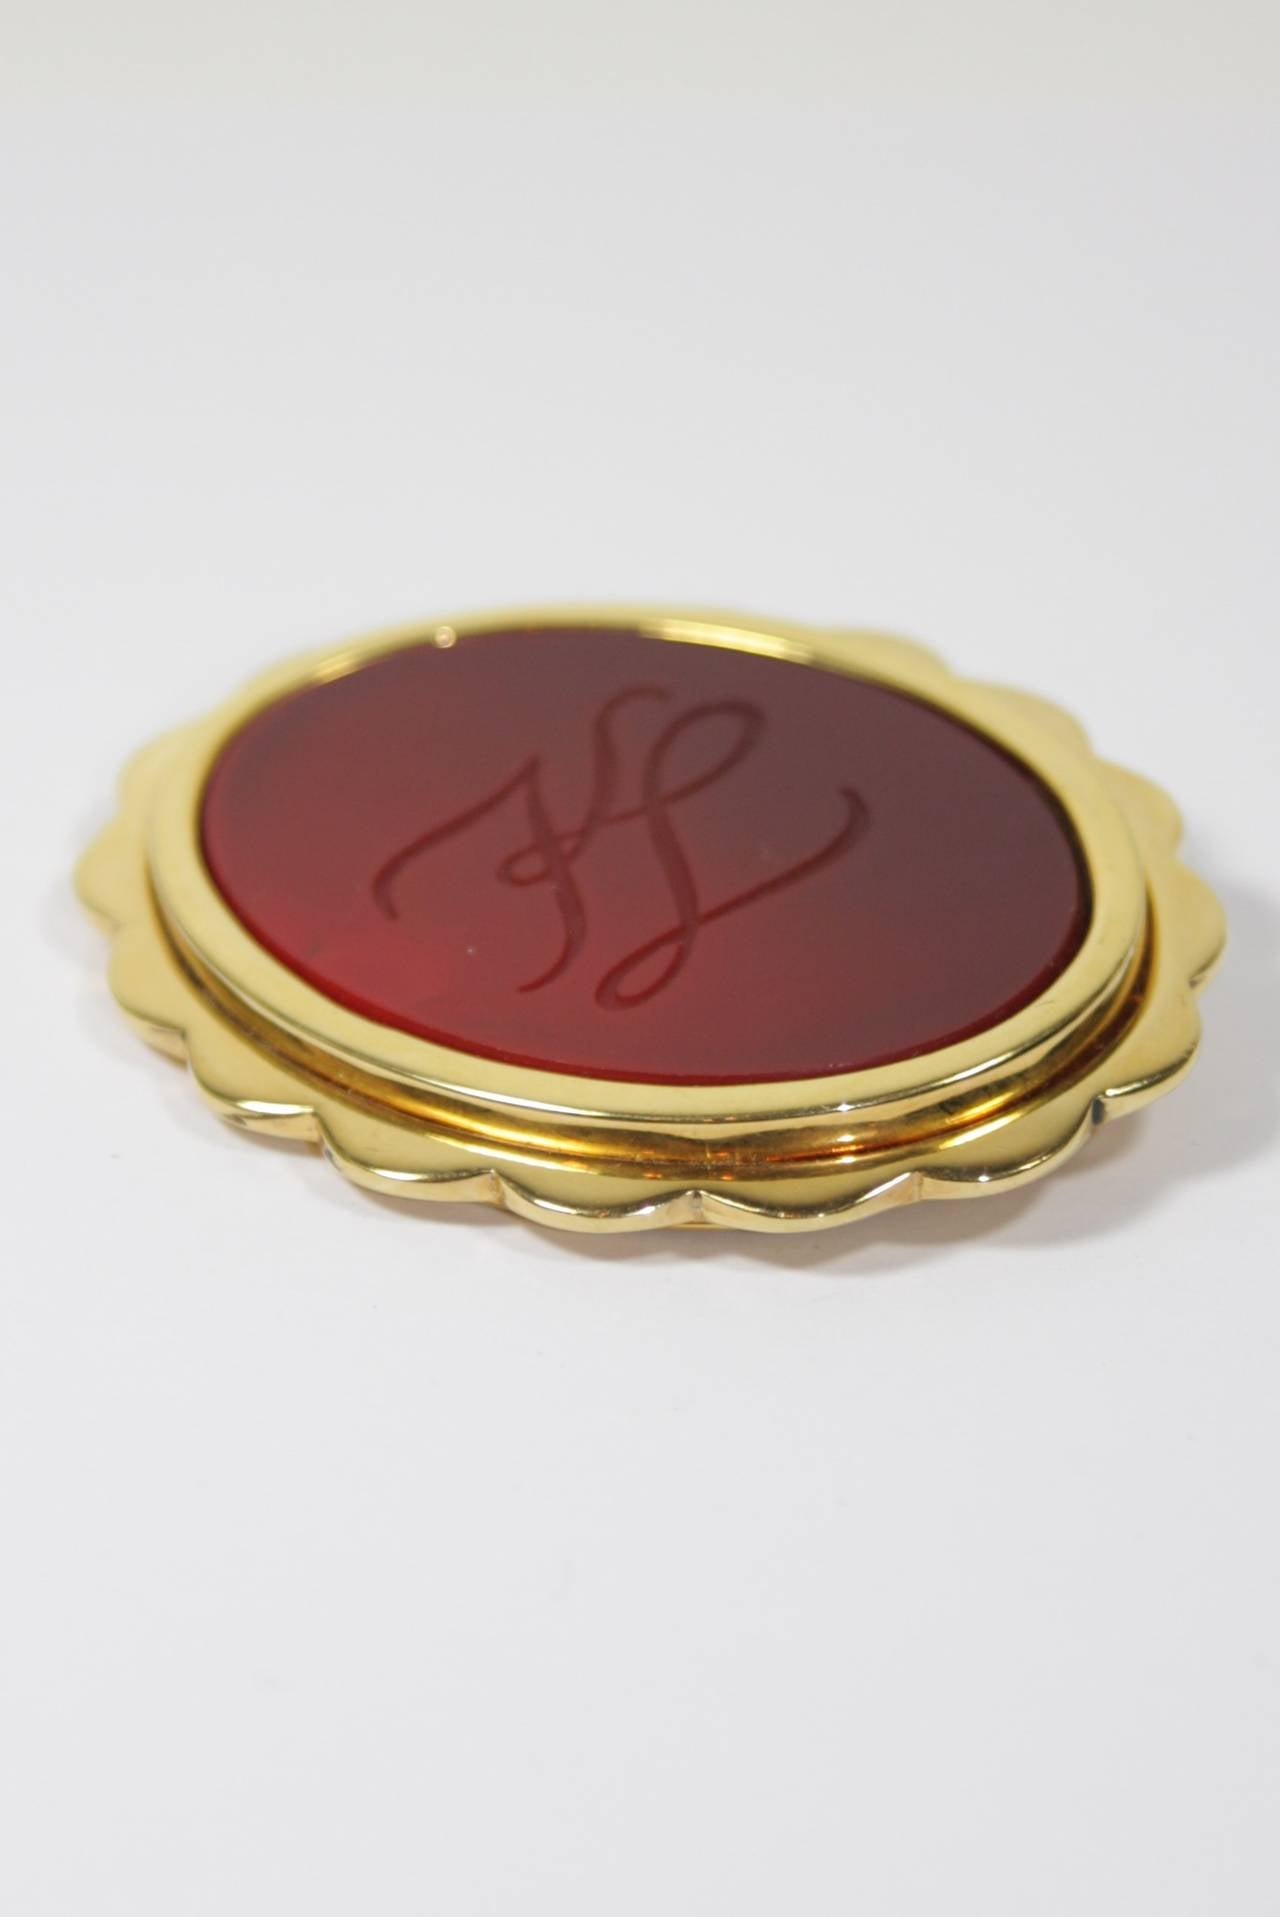 Women's Karl Lagerfield Red Glass with KL Engraved Monogram in a Gold Tone Frame Brooch